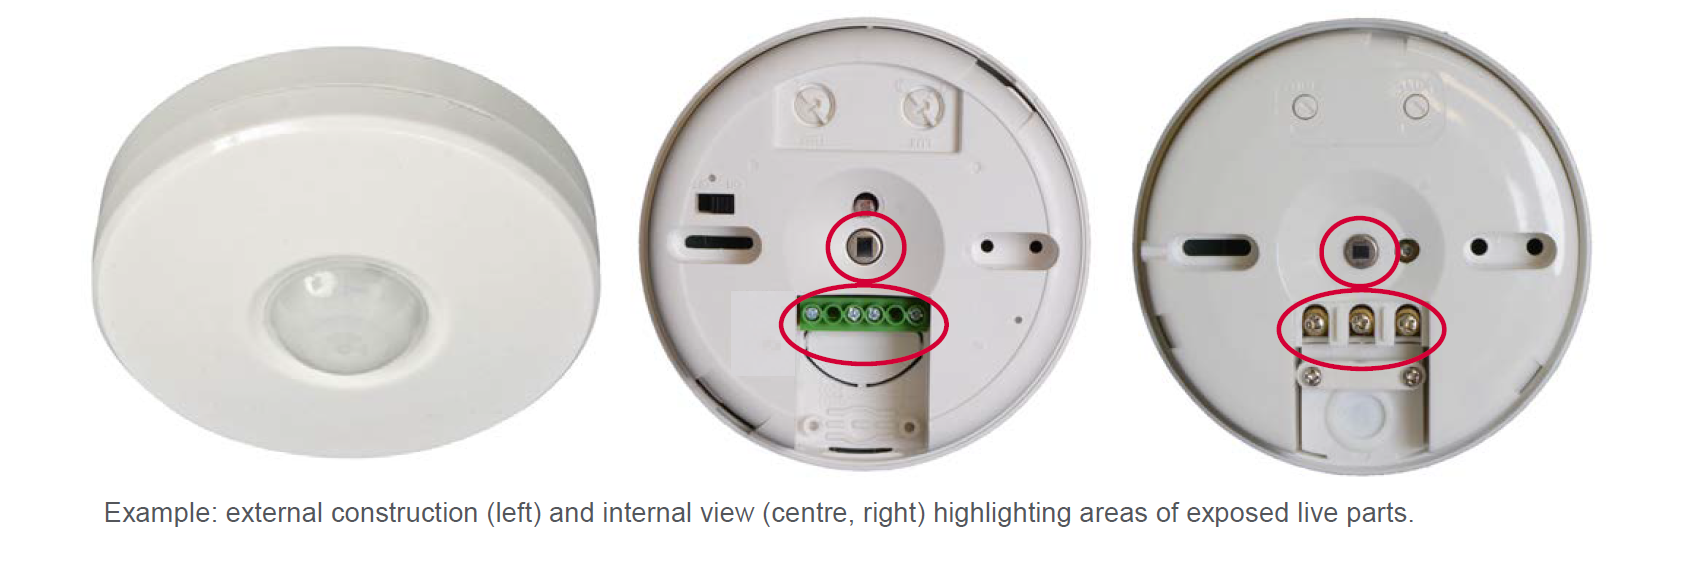 3 views of a PIR sensor. The left view shows the sensor as it would be seen when installed. The centre view shows the rear of the sensor with the internals exposed. The right view shows the rear of the sensor with the covers installed. The centre and right images have red circles to denote the exposed live parts.